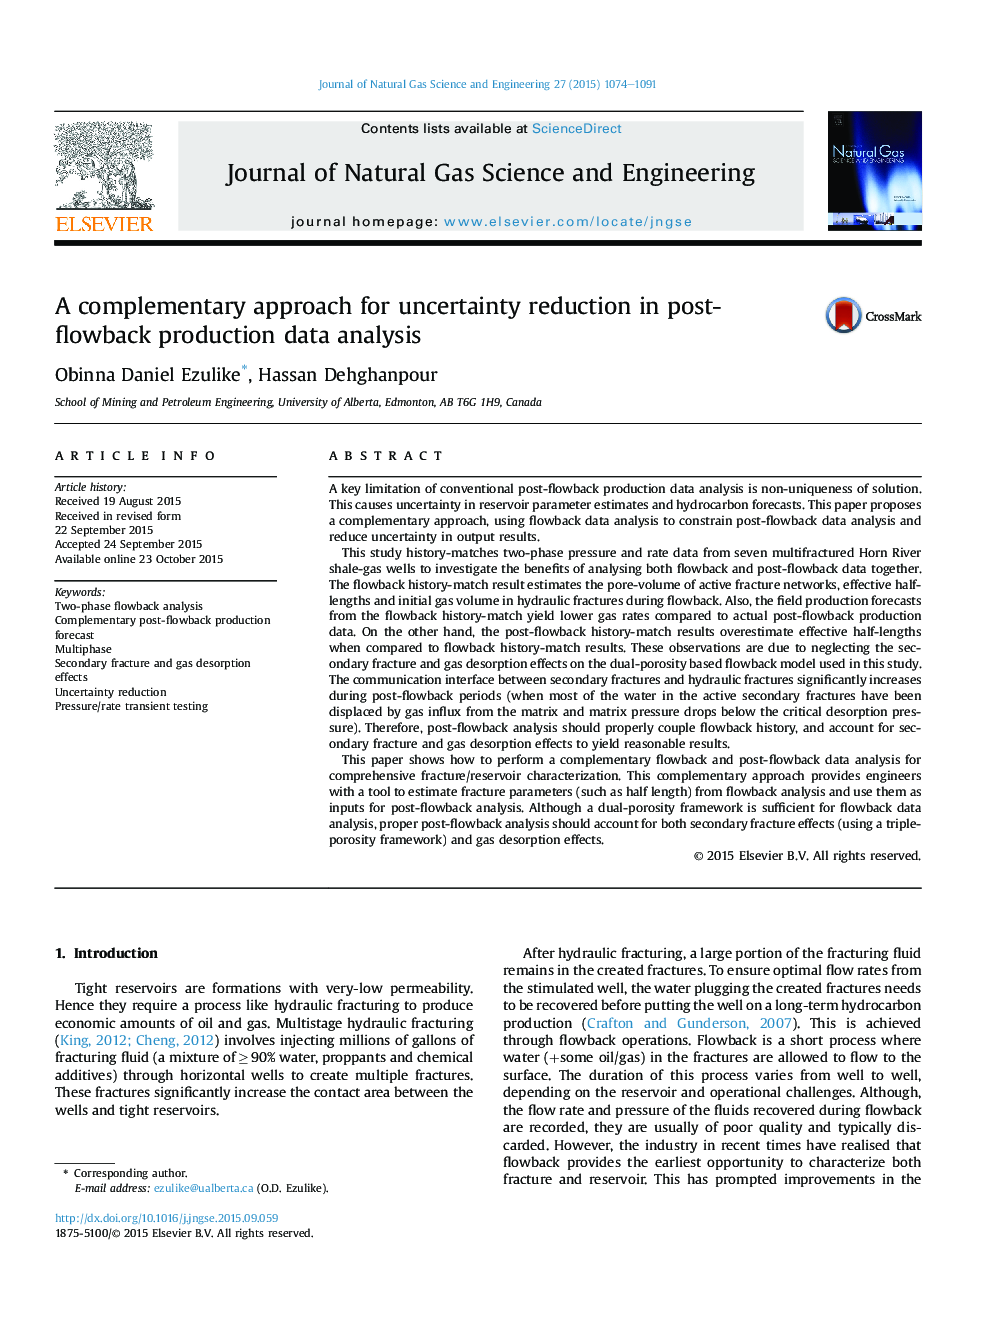 A complementary approach for uncertainty reduction in post-flowback production data analysis